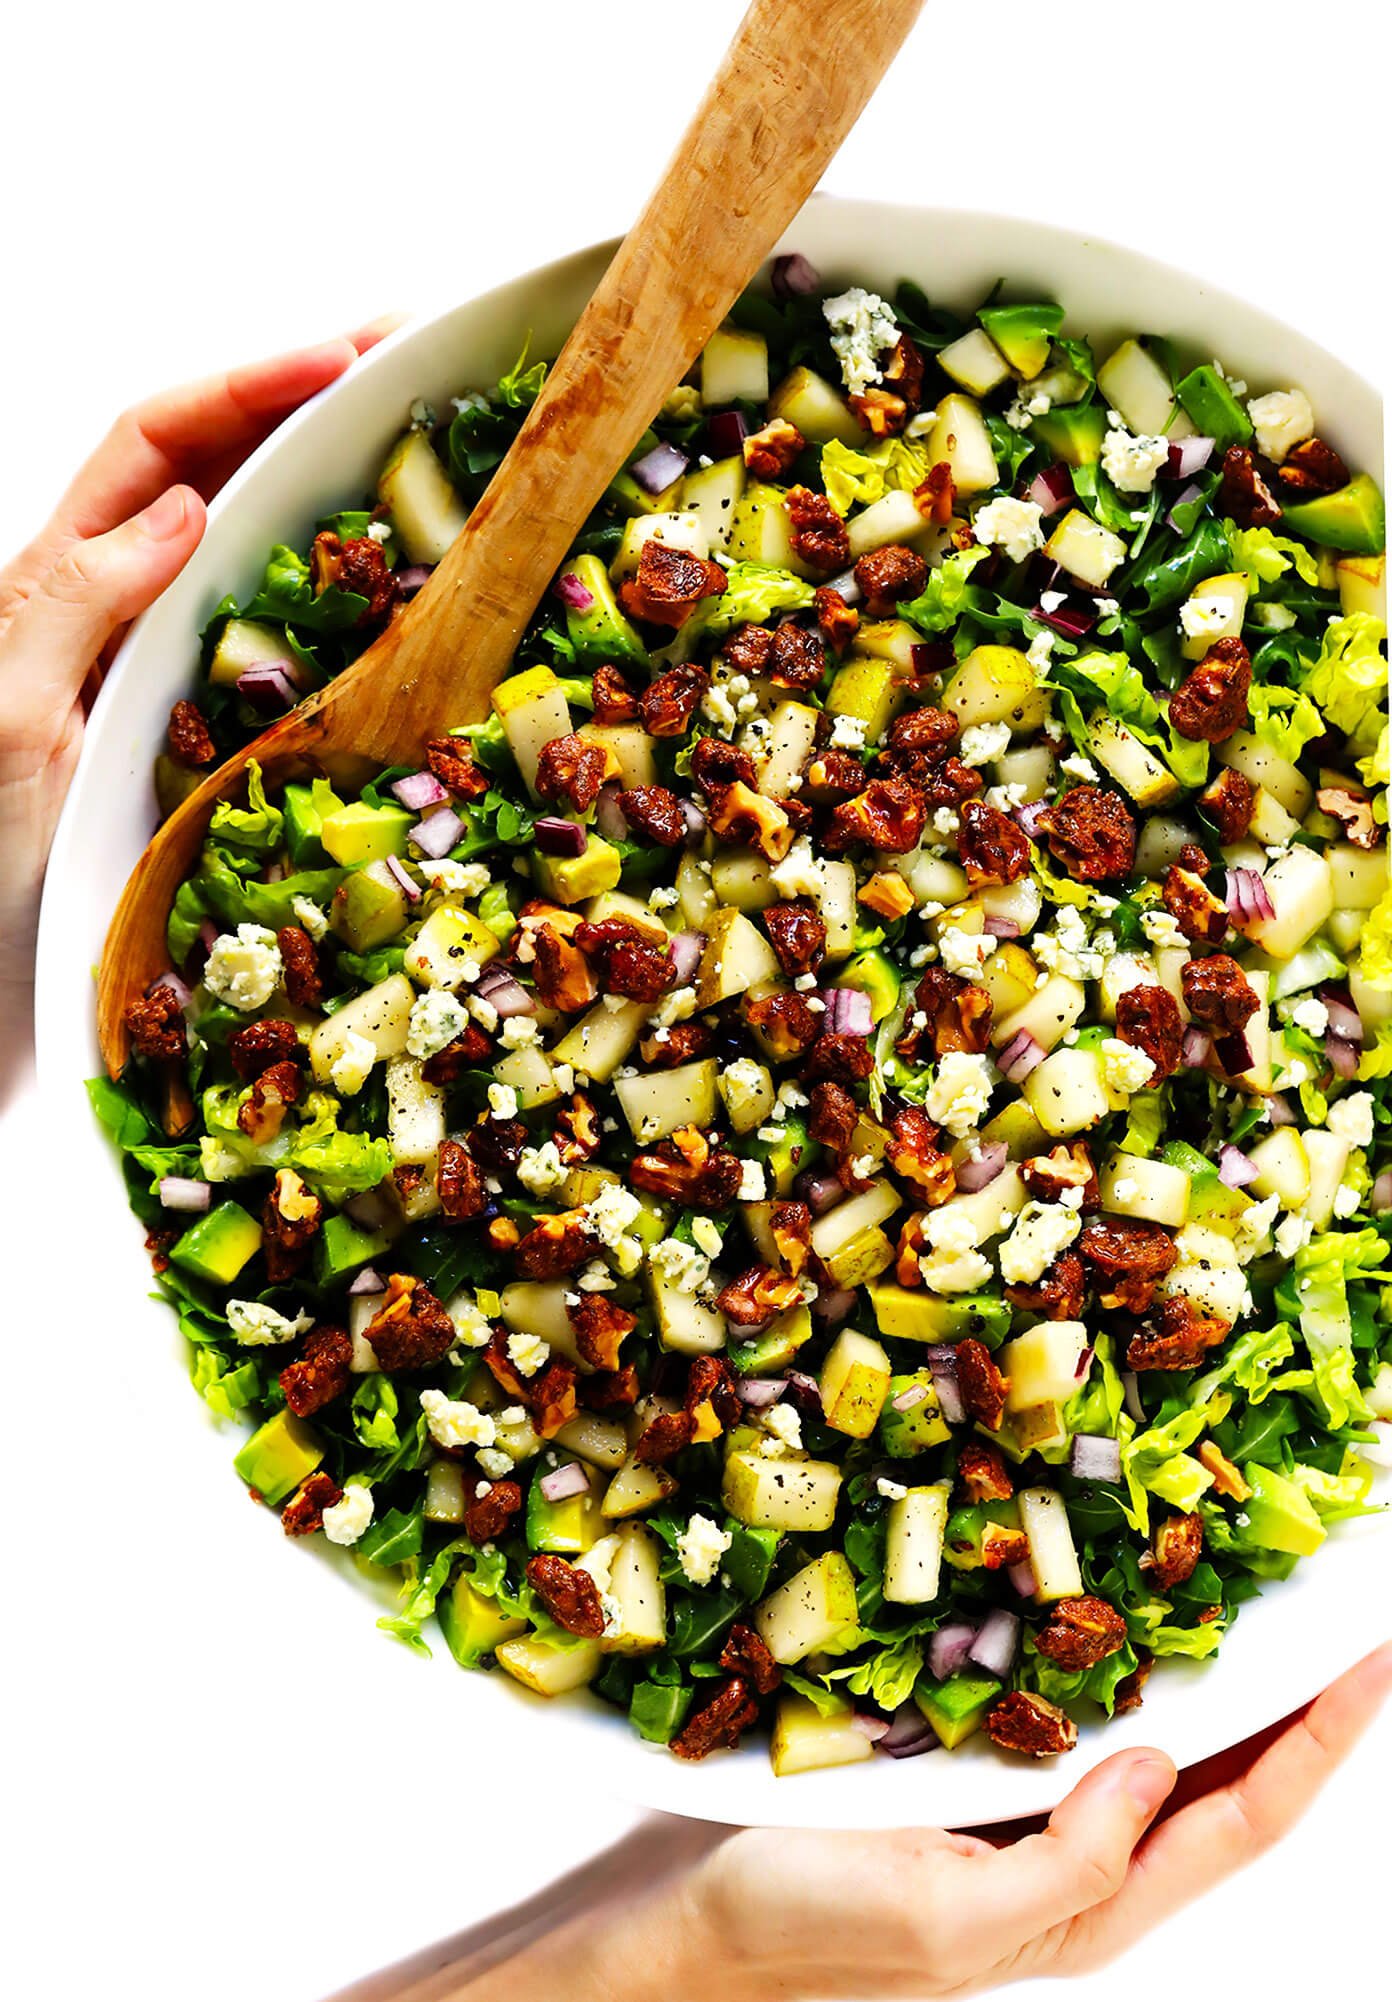 Pear Salad with Gorgonzola and Candied Walnuts - Gimme Some Oven